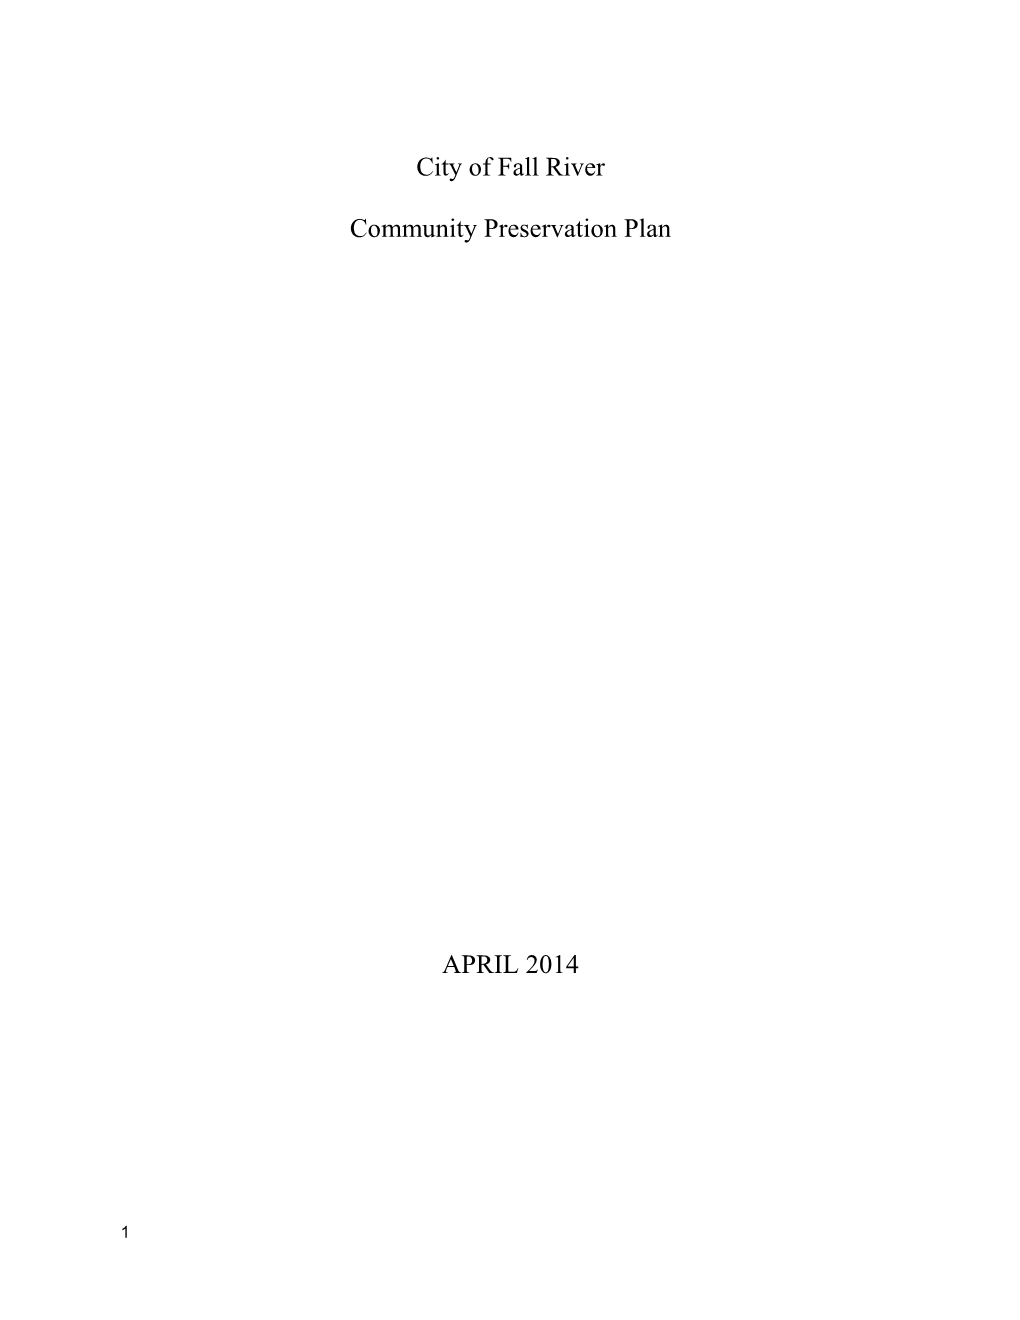 City of Fall River Community Preservation Plan APRIL 2014